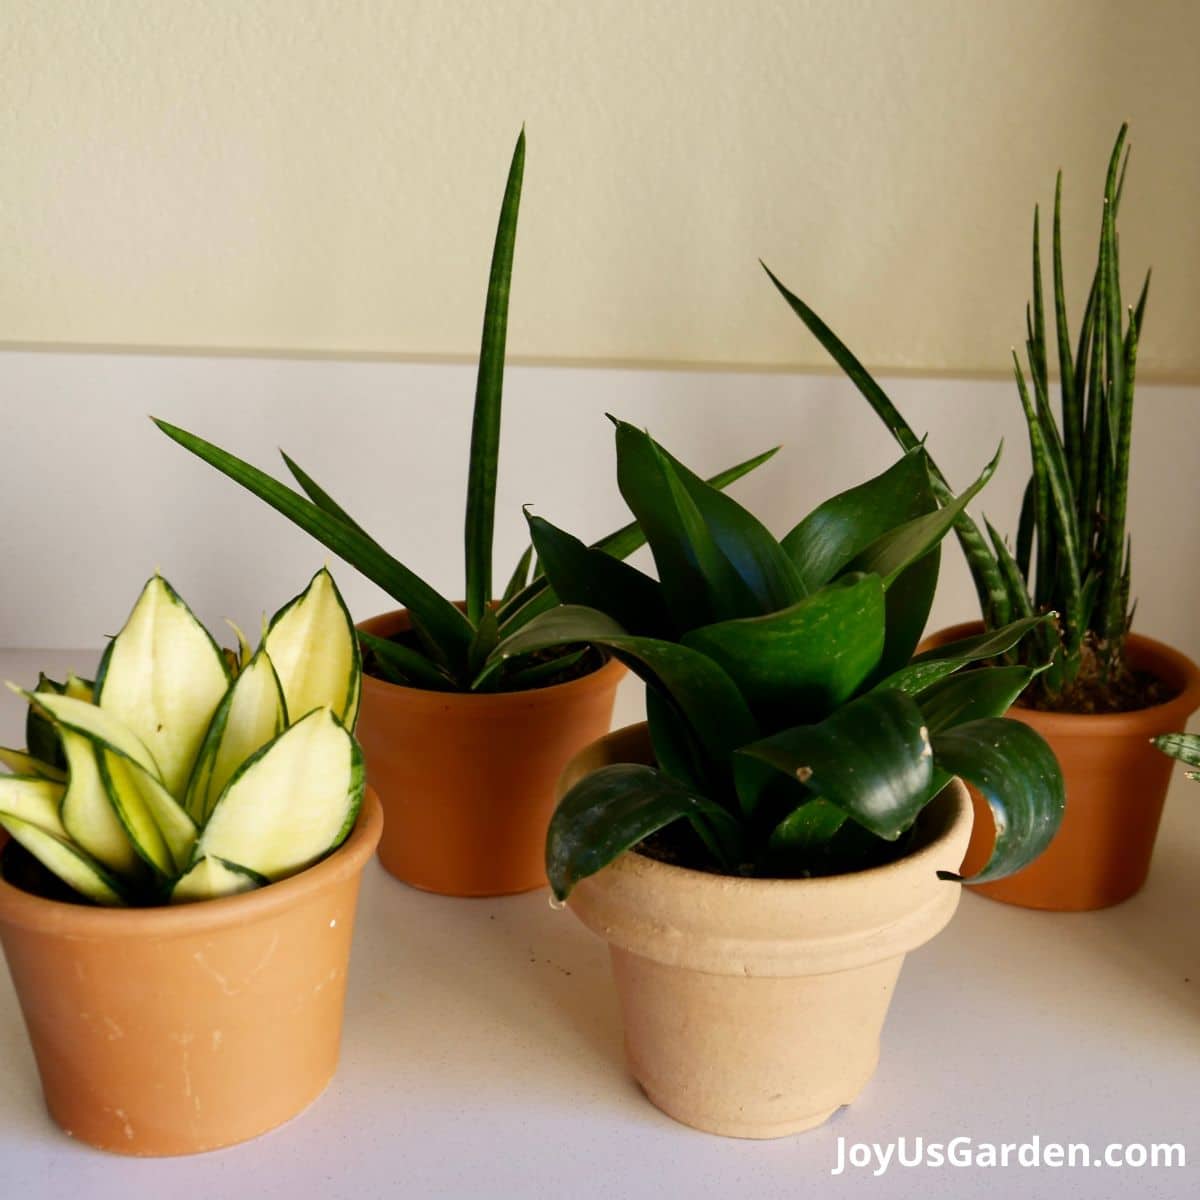 four different types of snake plants growing indoor in terracotta clay pots